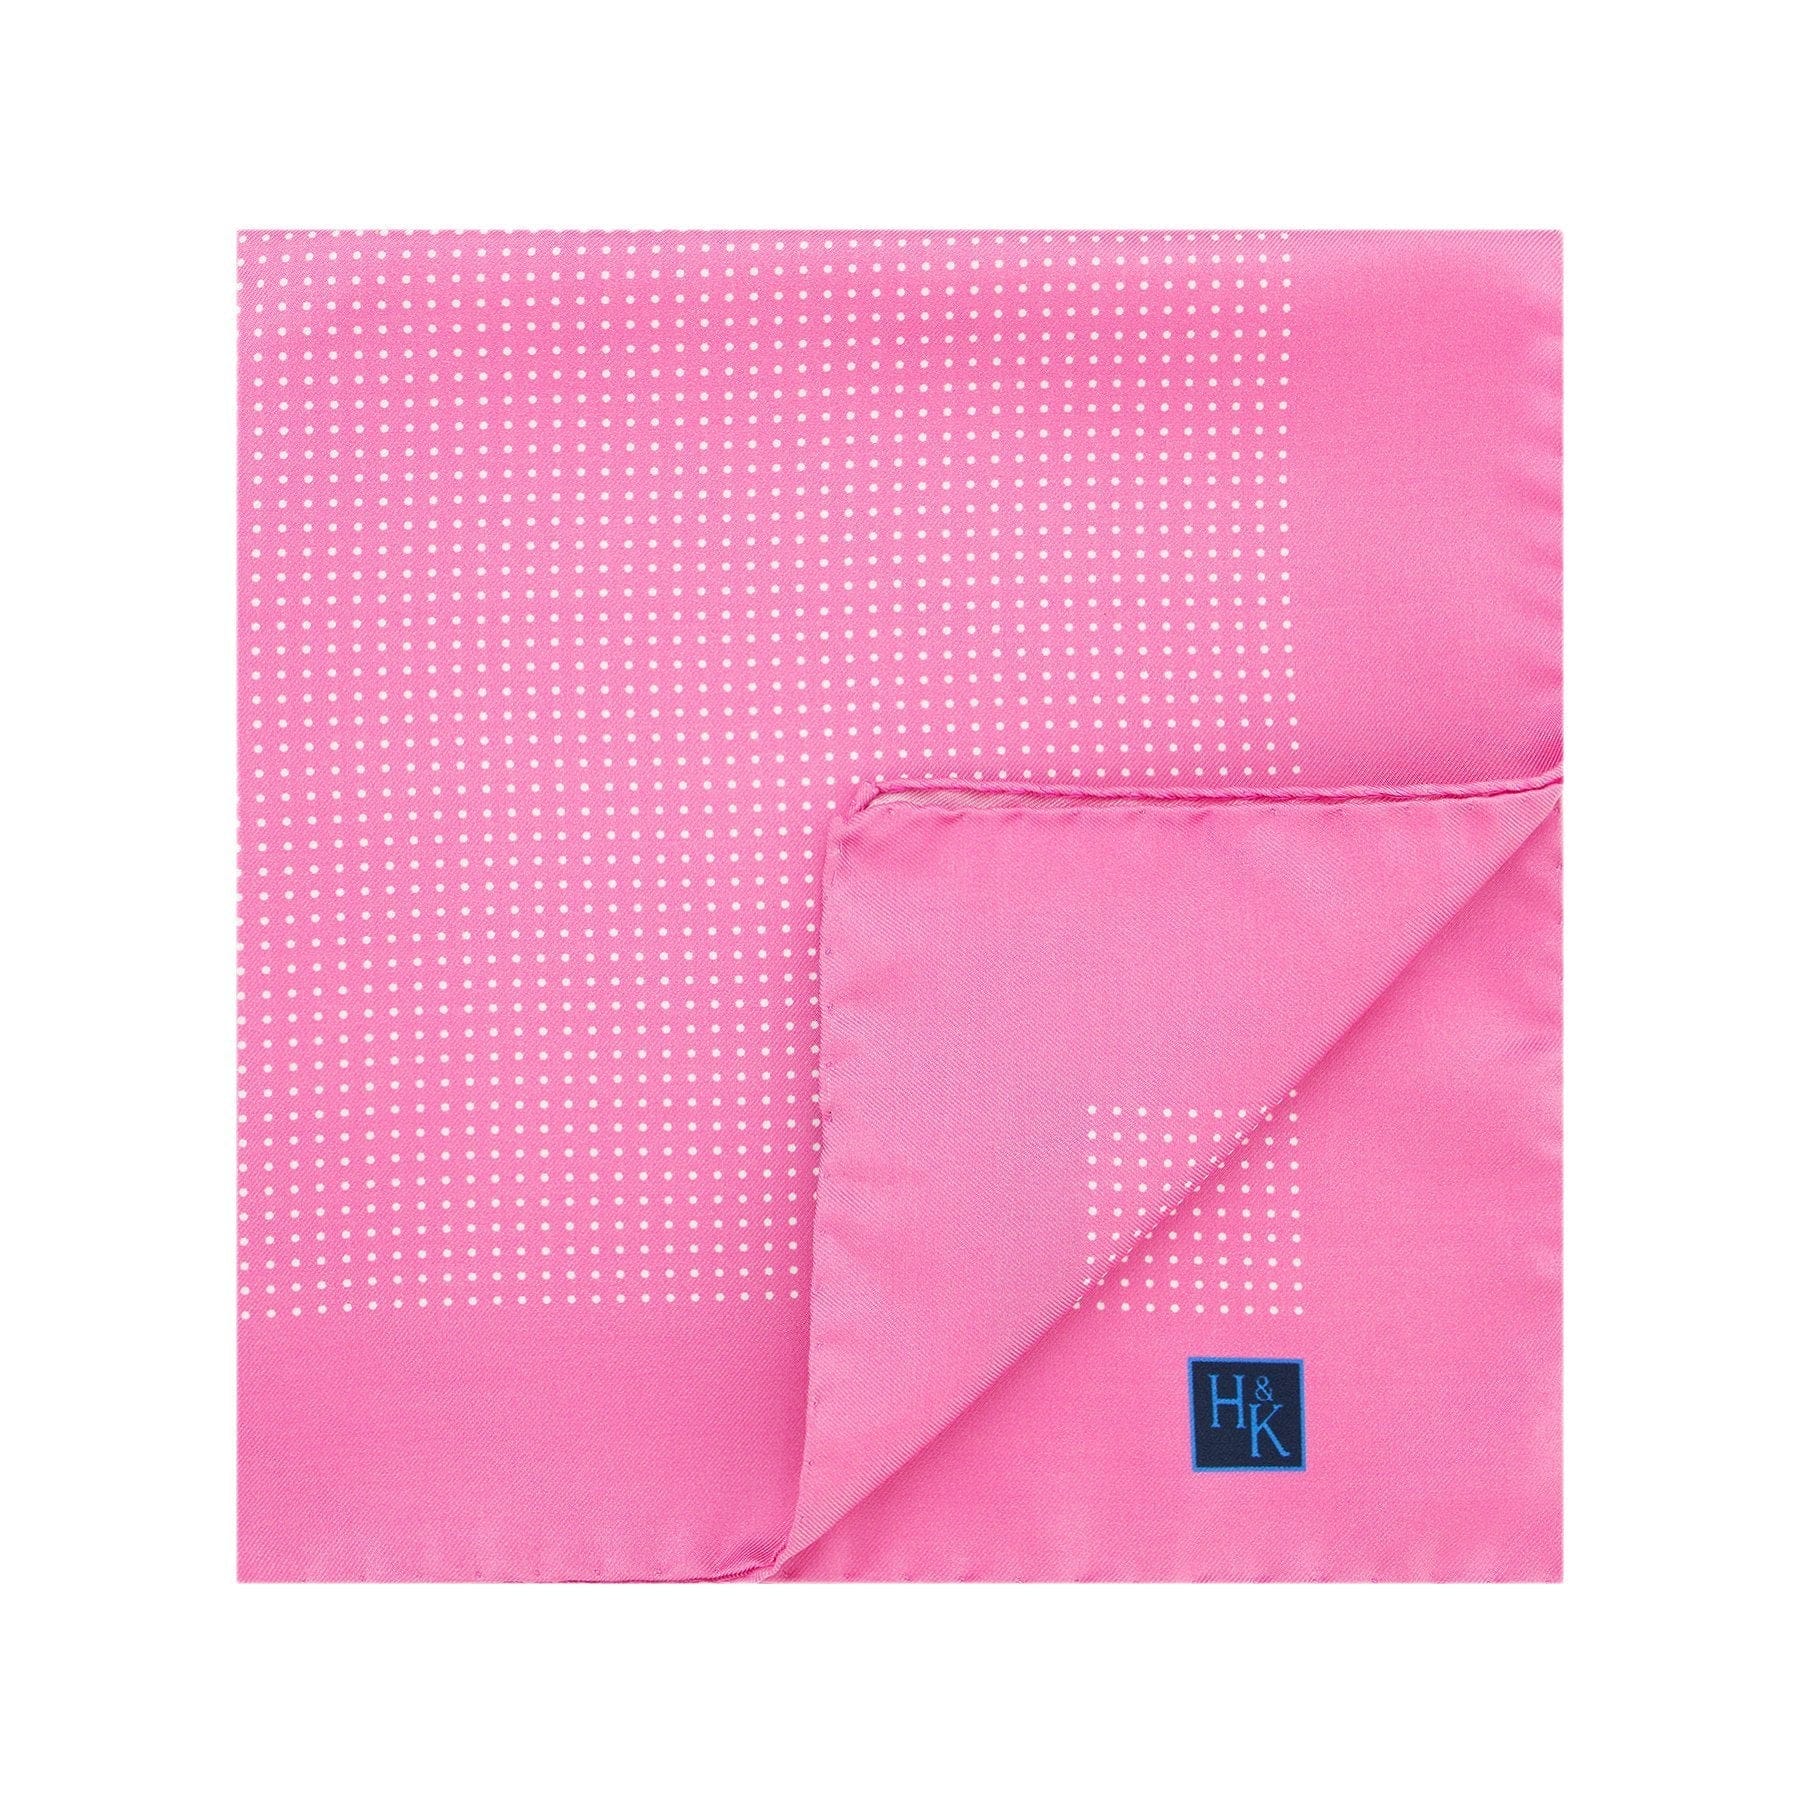 Pink Silk Handkerchief with White Pin Spots